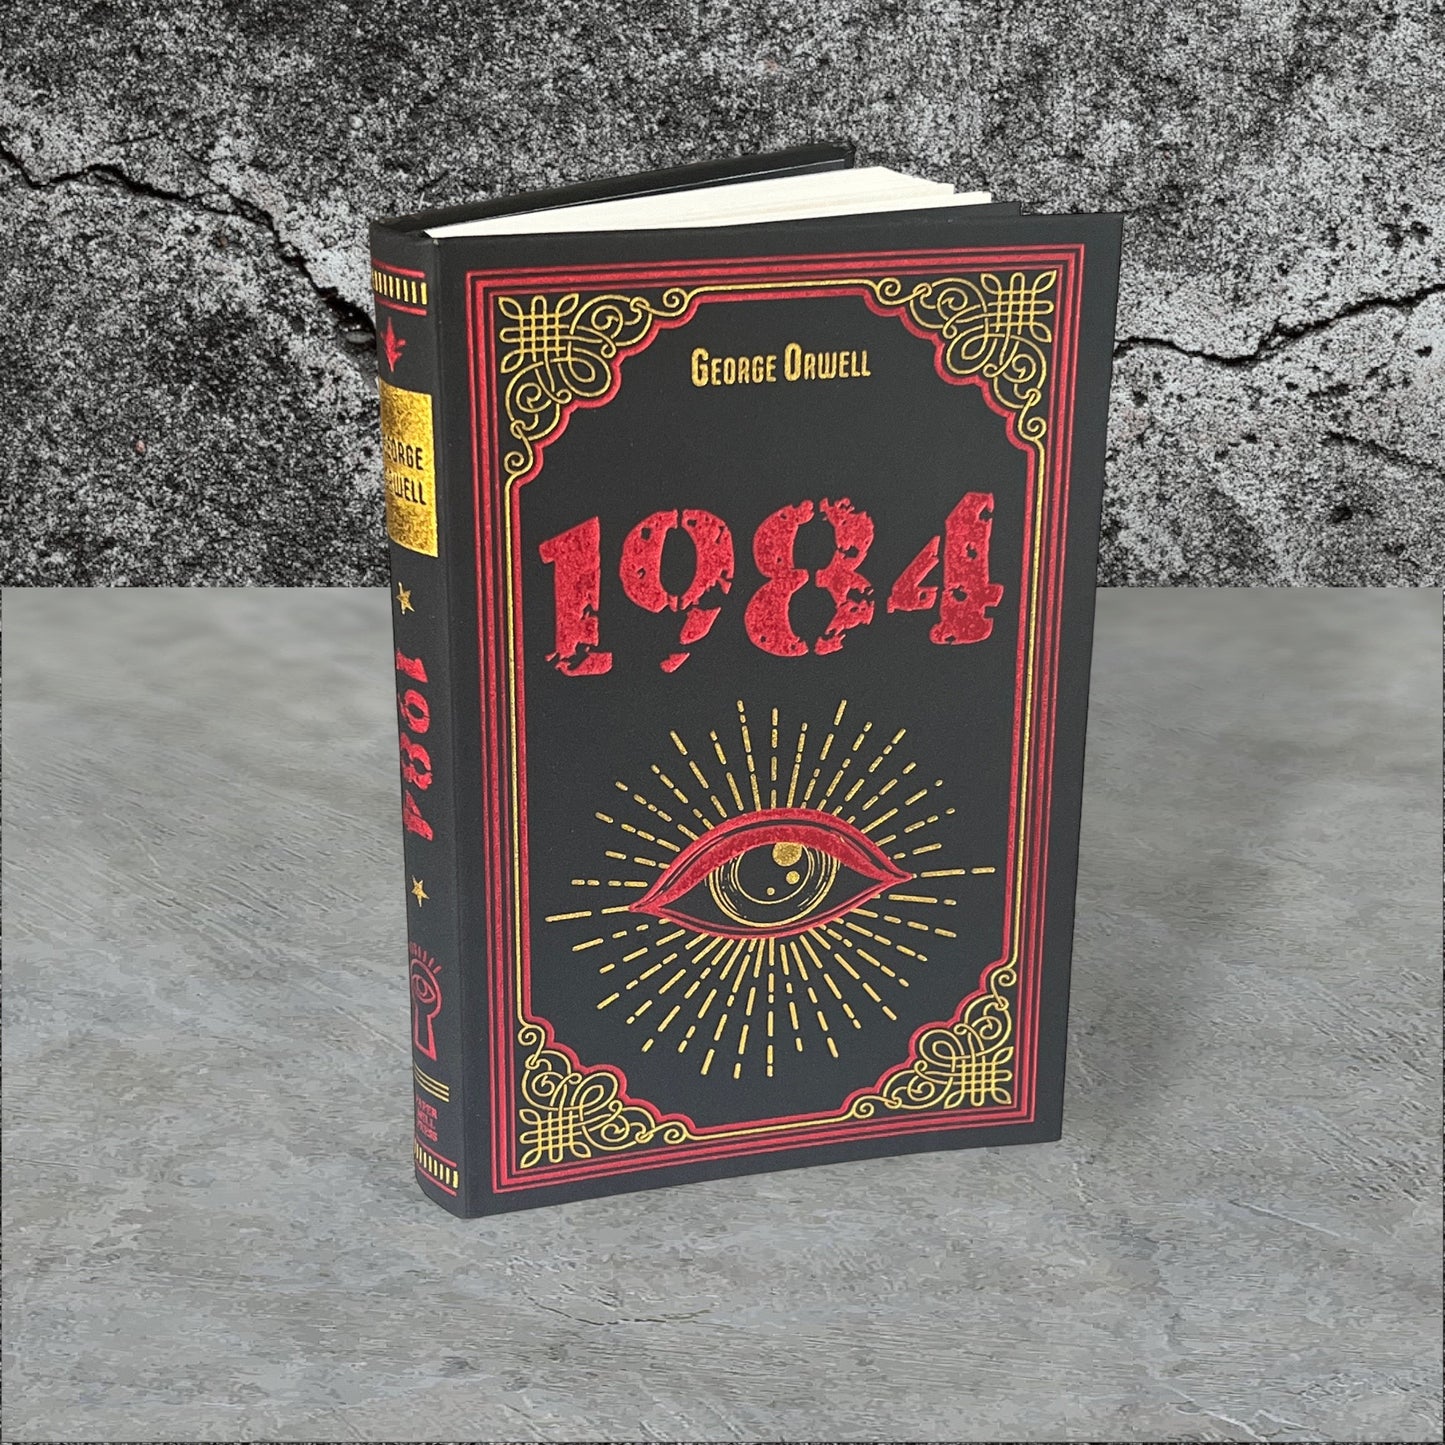 1984 Nineteen Eighty-Four by GEORGE ORWELL - Collectible Special Gift Edition - Imitation Leather Cover - Best Seller - Classic Book